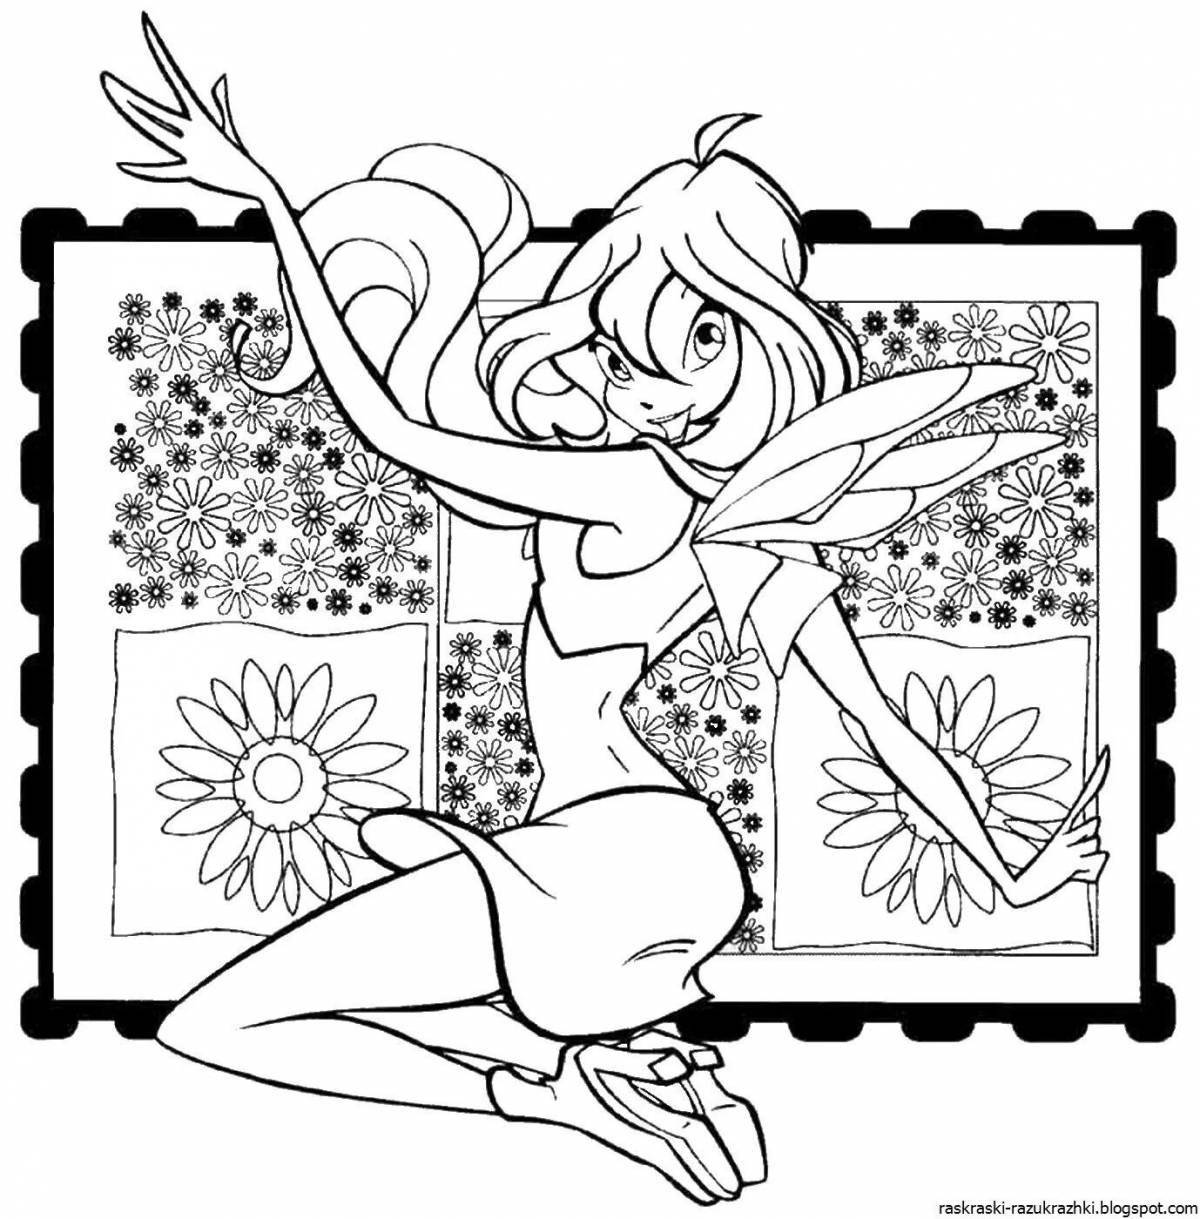 Creative coloring game for girls 9-10 years old